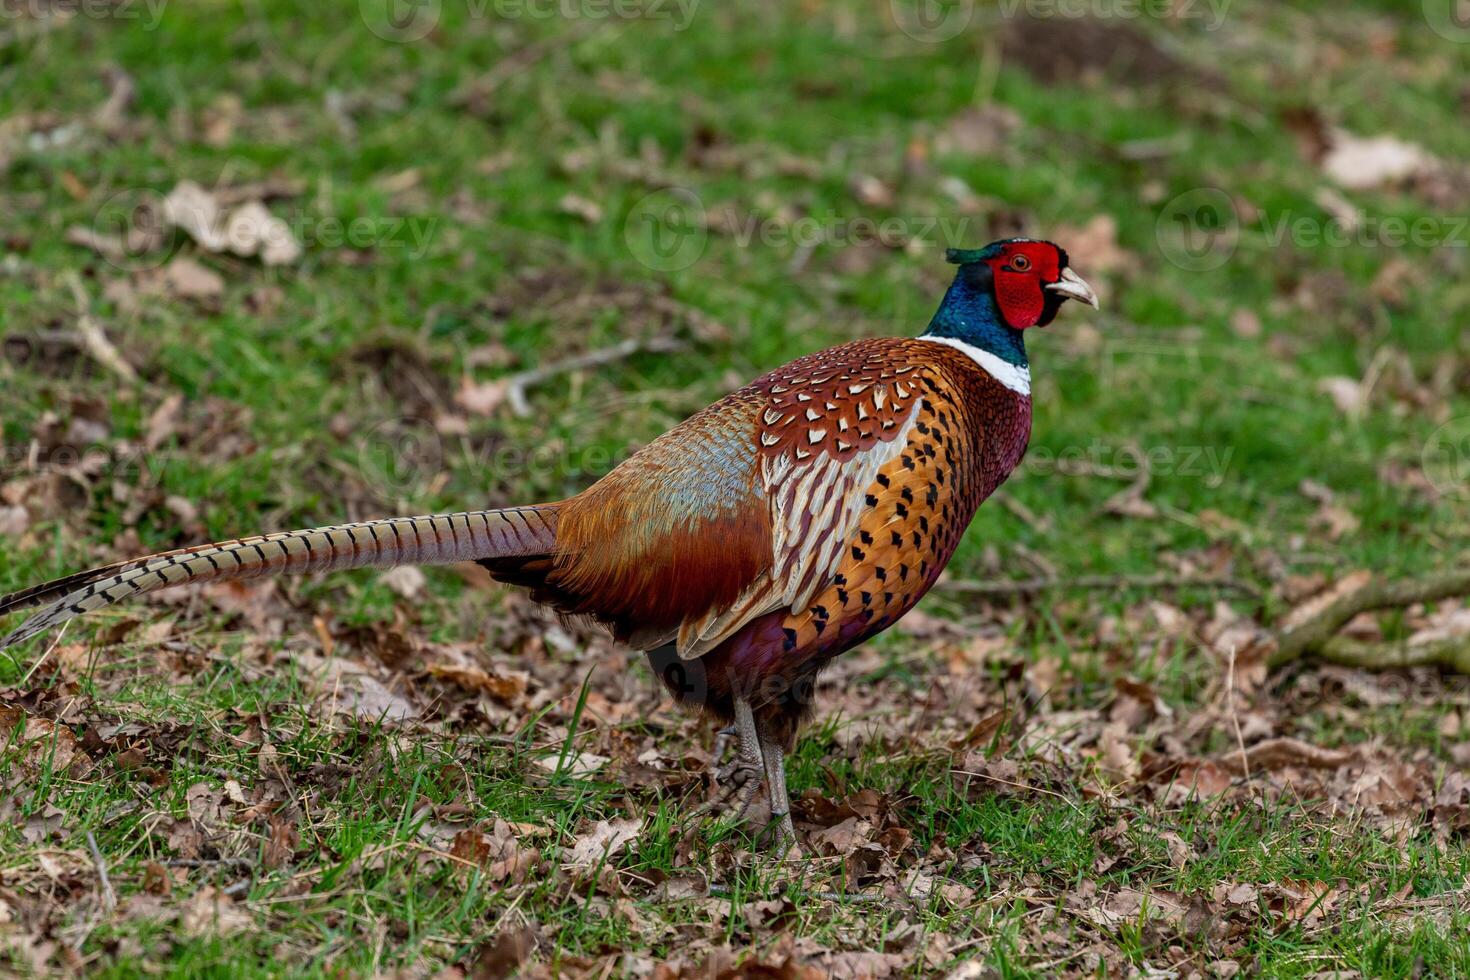 Colorful male pheasant bird walking on grassy field with fallen leaves. photo